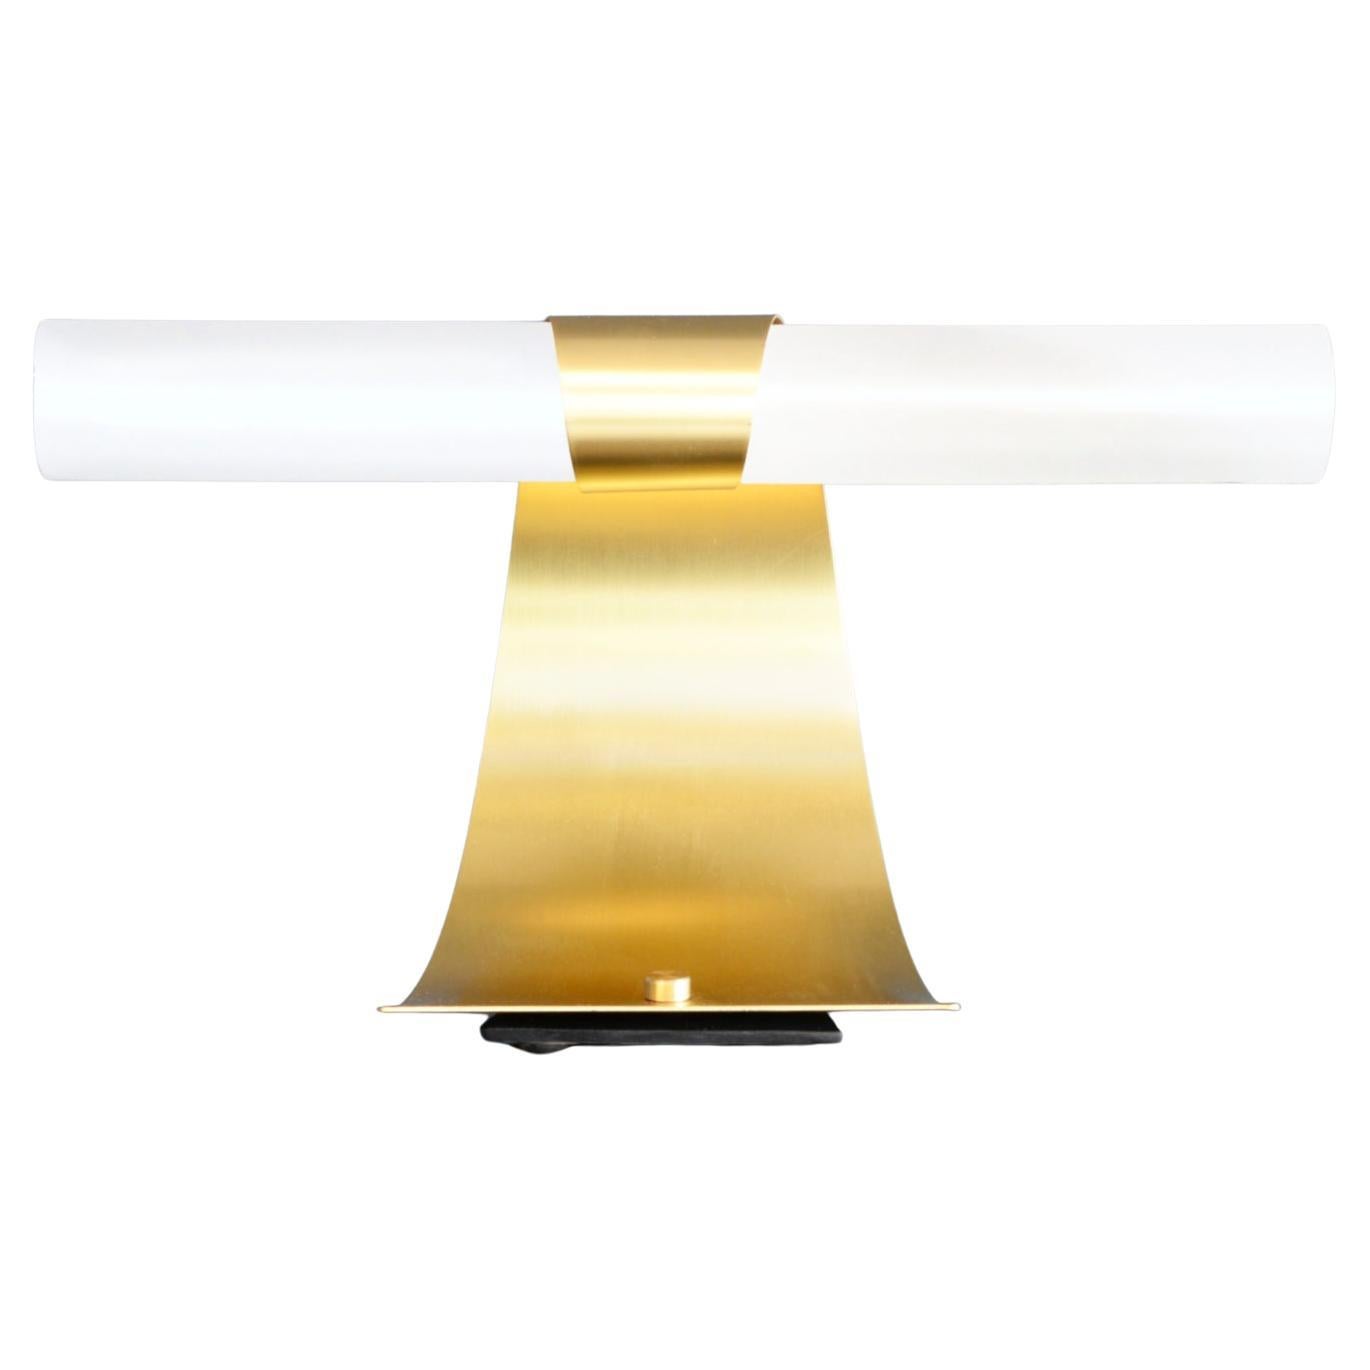 OPUS Desk Lamp in Brushed Brass and Opaque Glass